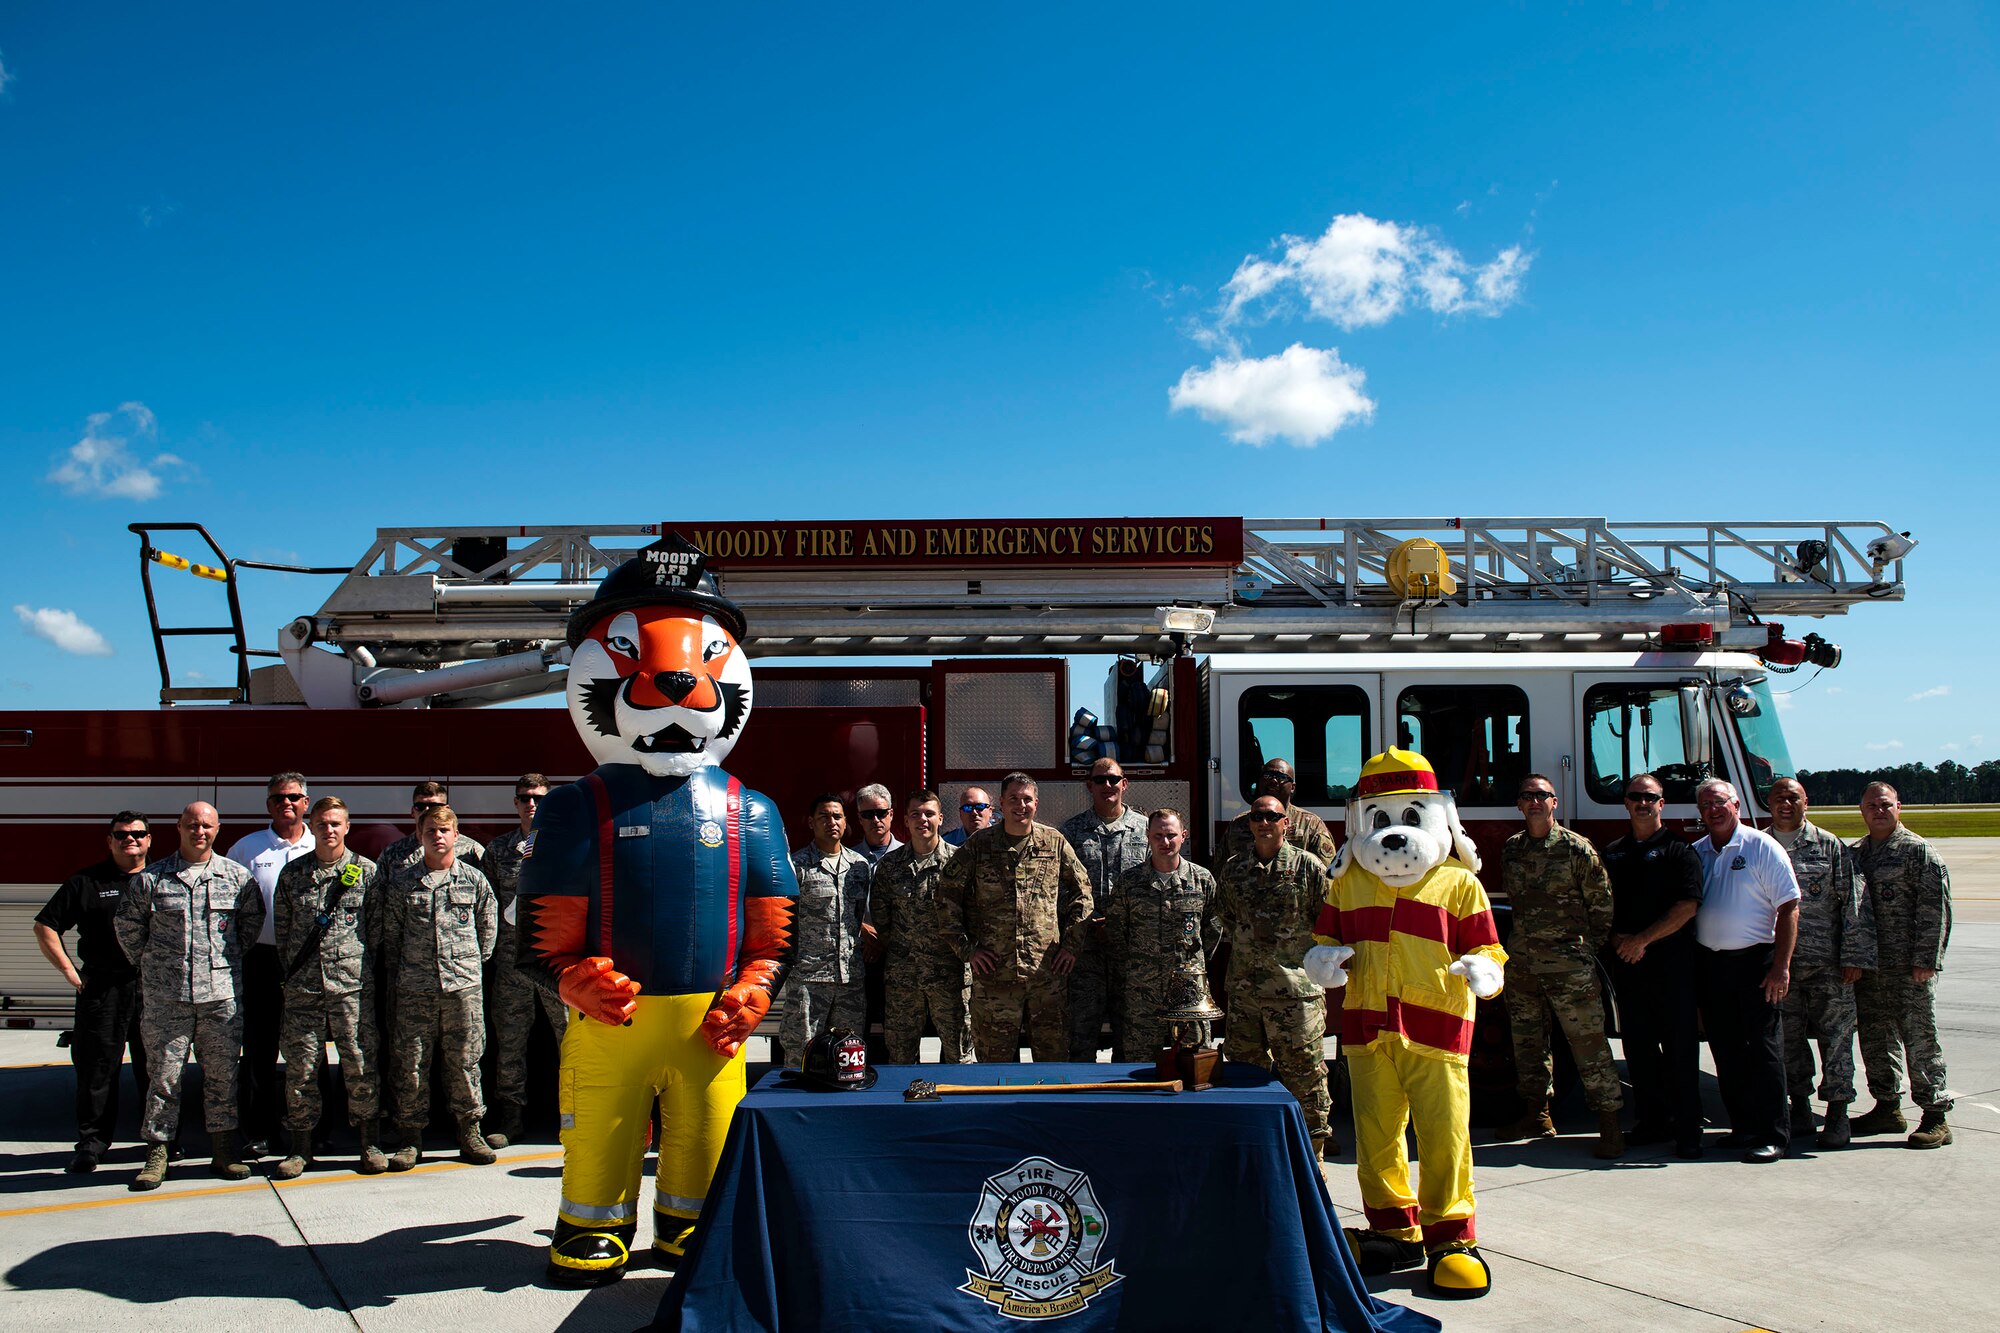 Airmen from the 23d Civil Engineer Squadron and 23d Wing leadership pose for a photo Sept. 23, 2019, at Moody Air Force Base, Ga. Col. Daniel P. Walls, 23d Wing commander, proclaimed the week of Oct. 6-12 as Fire Prevention Week, which is designed to commemorate the sacrifices of our firefighters and teach fire safety to others. (U.S. Air Force photo by Senior Airman Erick Requadt)